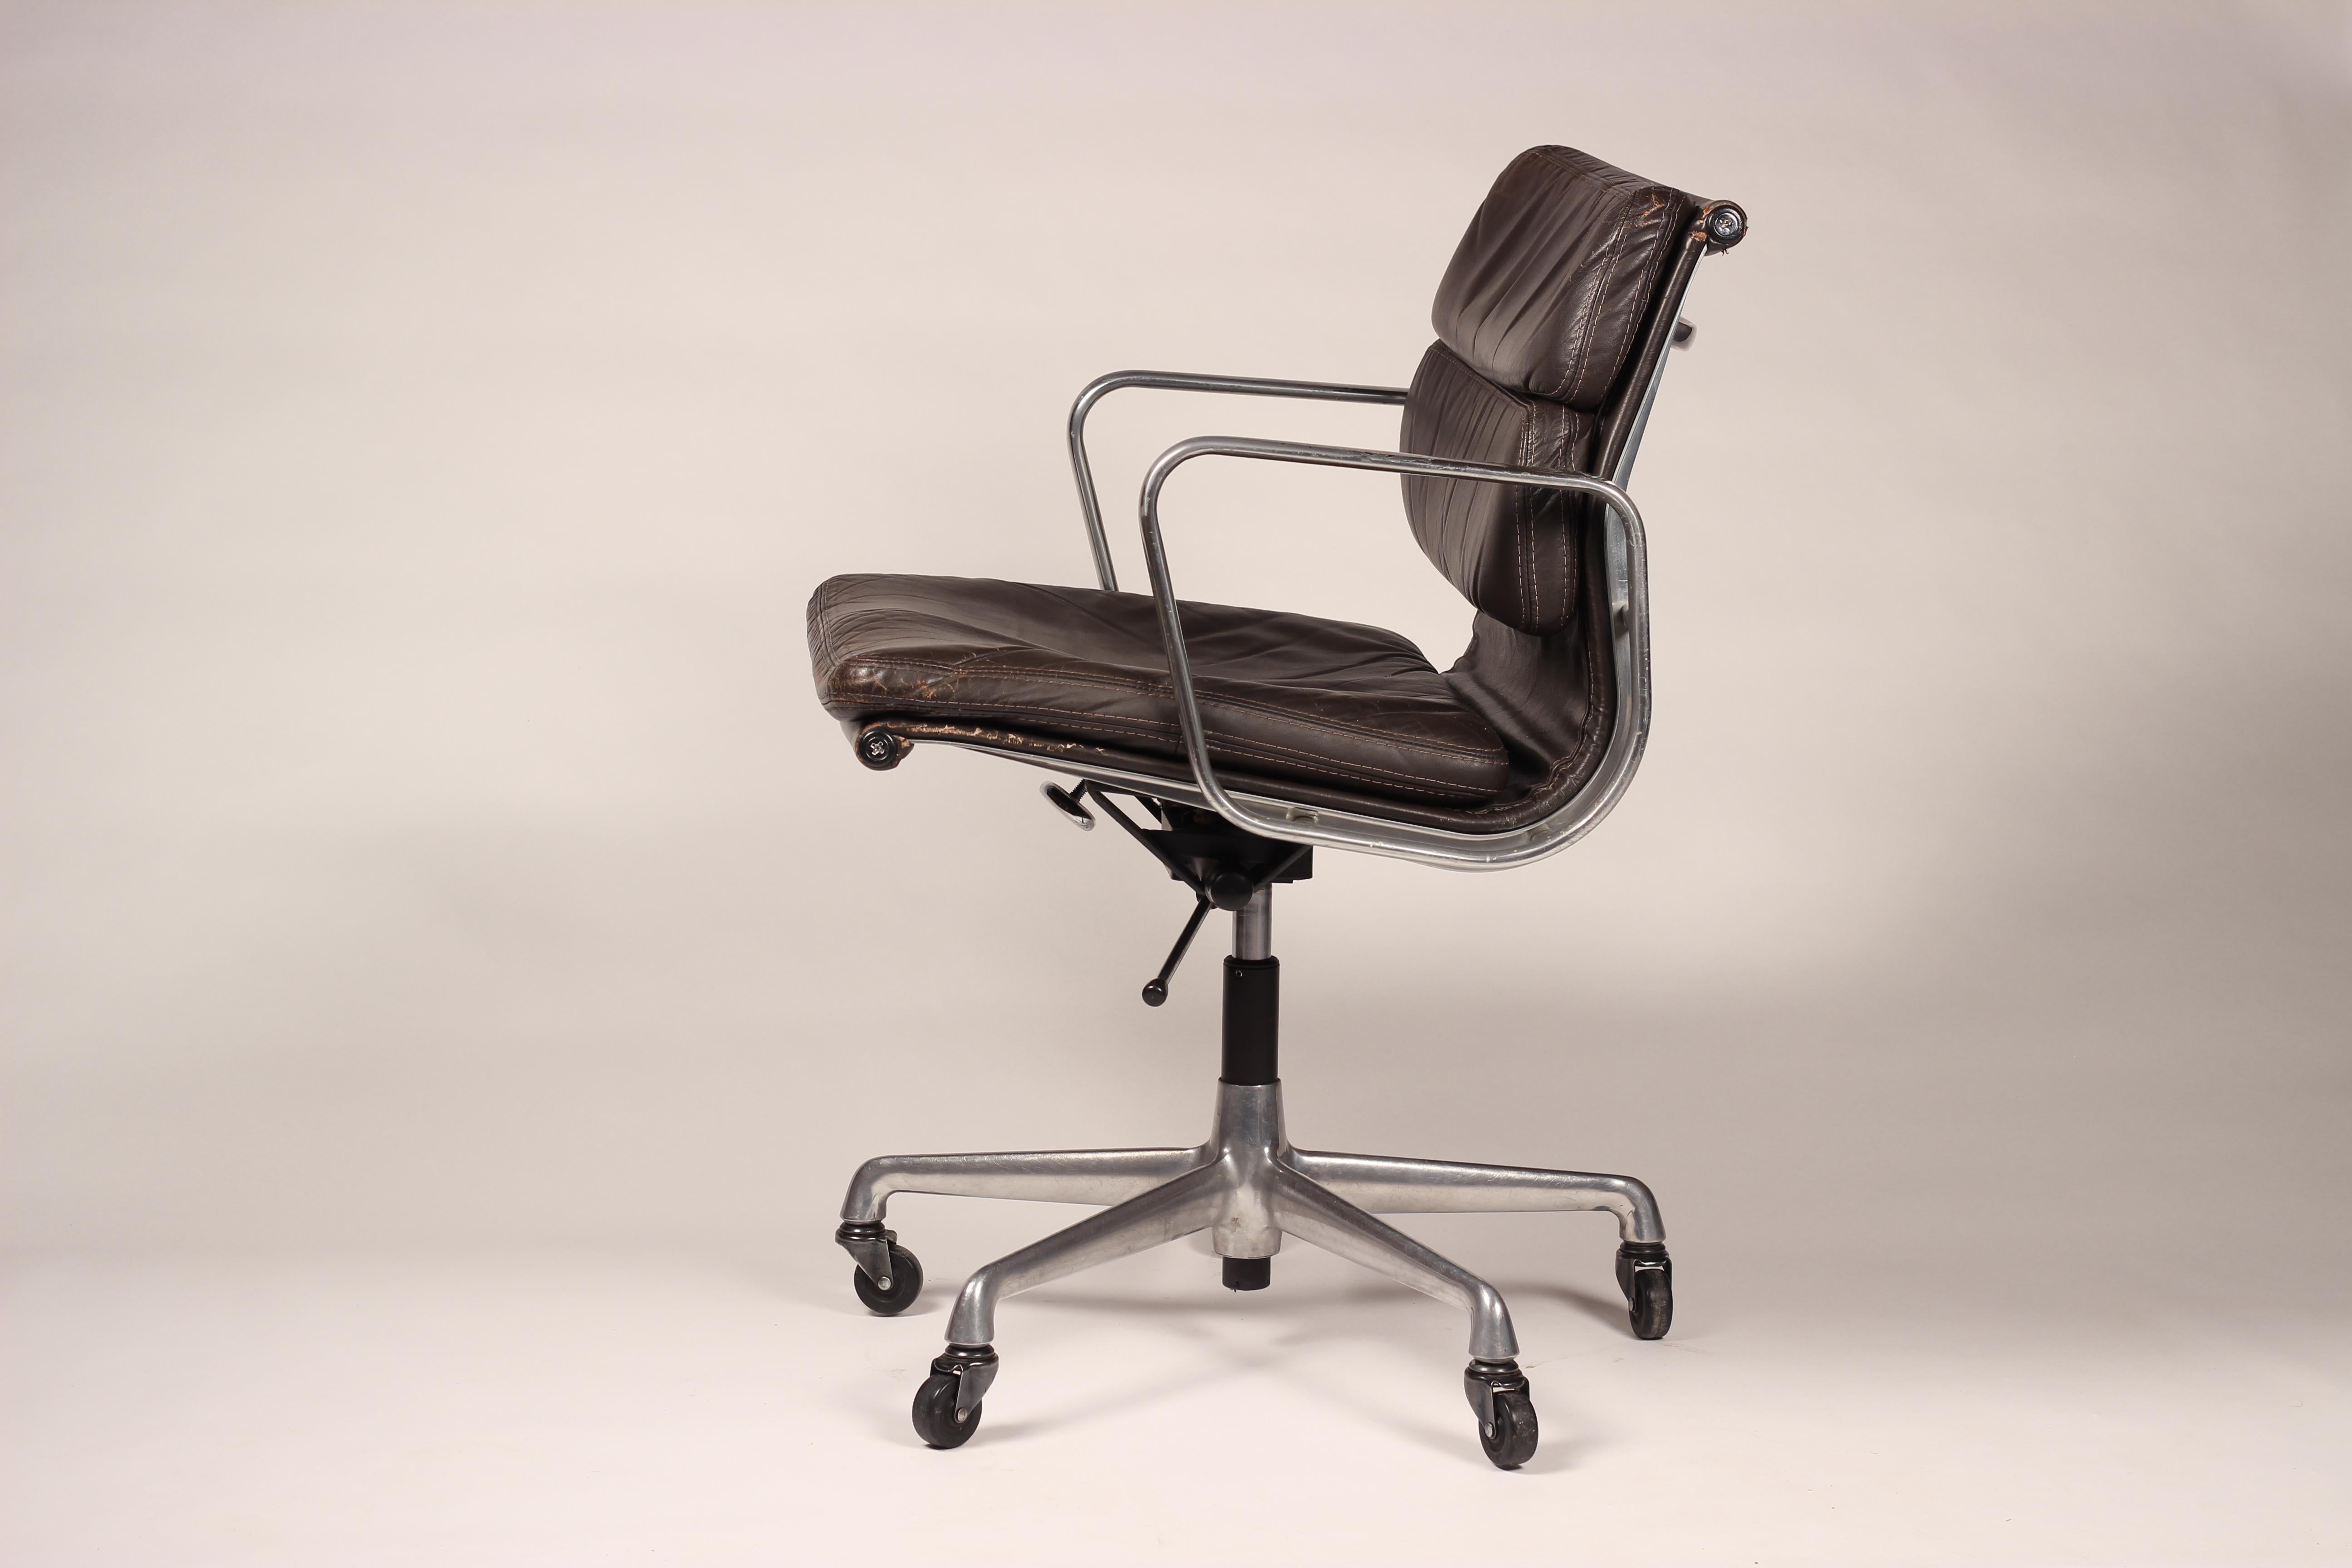 Timeless mid Century Modern Eames Aluminum Group brown leather soft pad Executive chair (model EA 435) on casters for Herman Miller. The seat has the original soft brown leather upholstery and is raised on a spindle seat-height adjustable